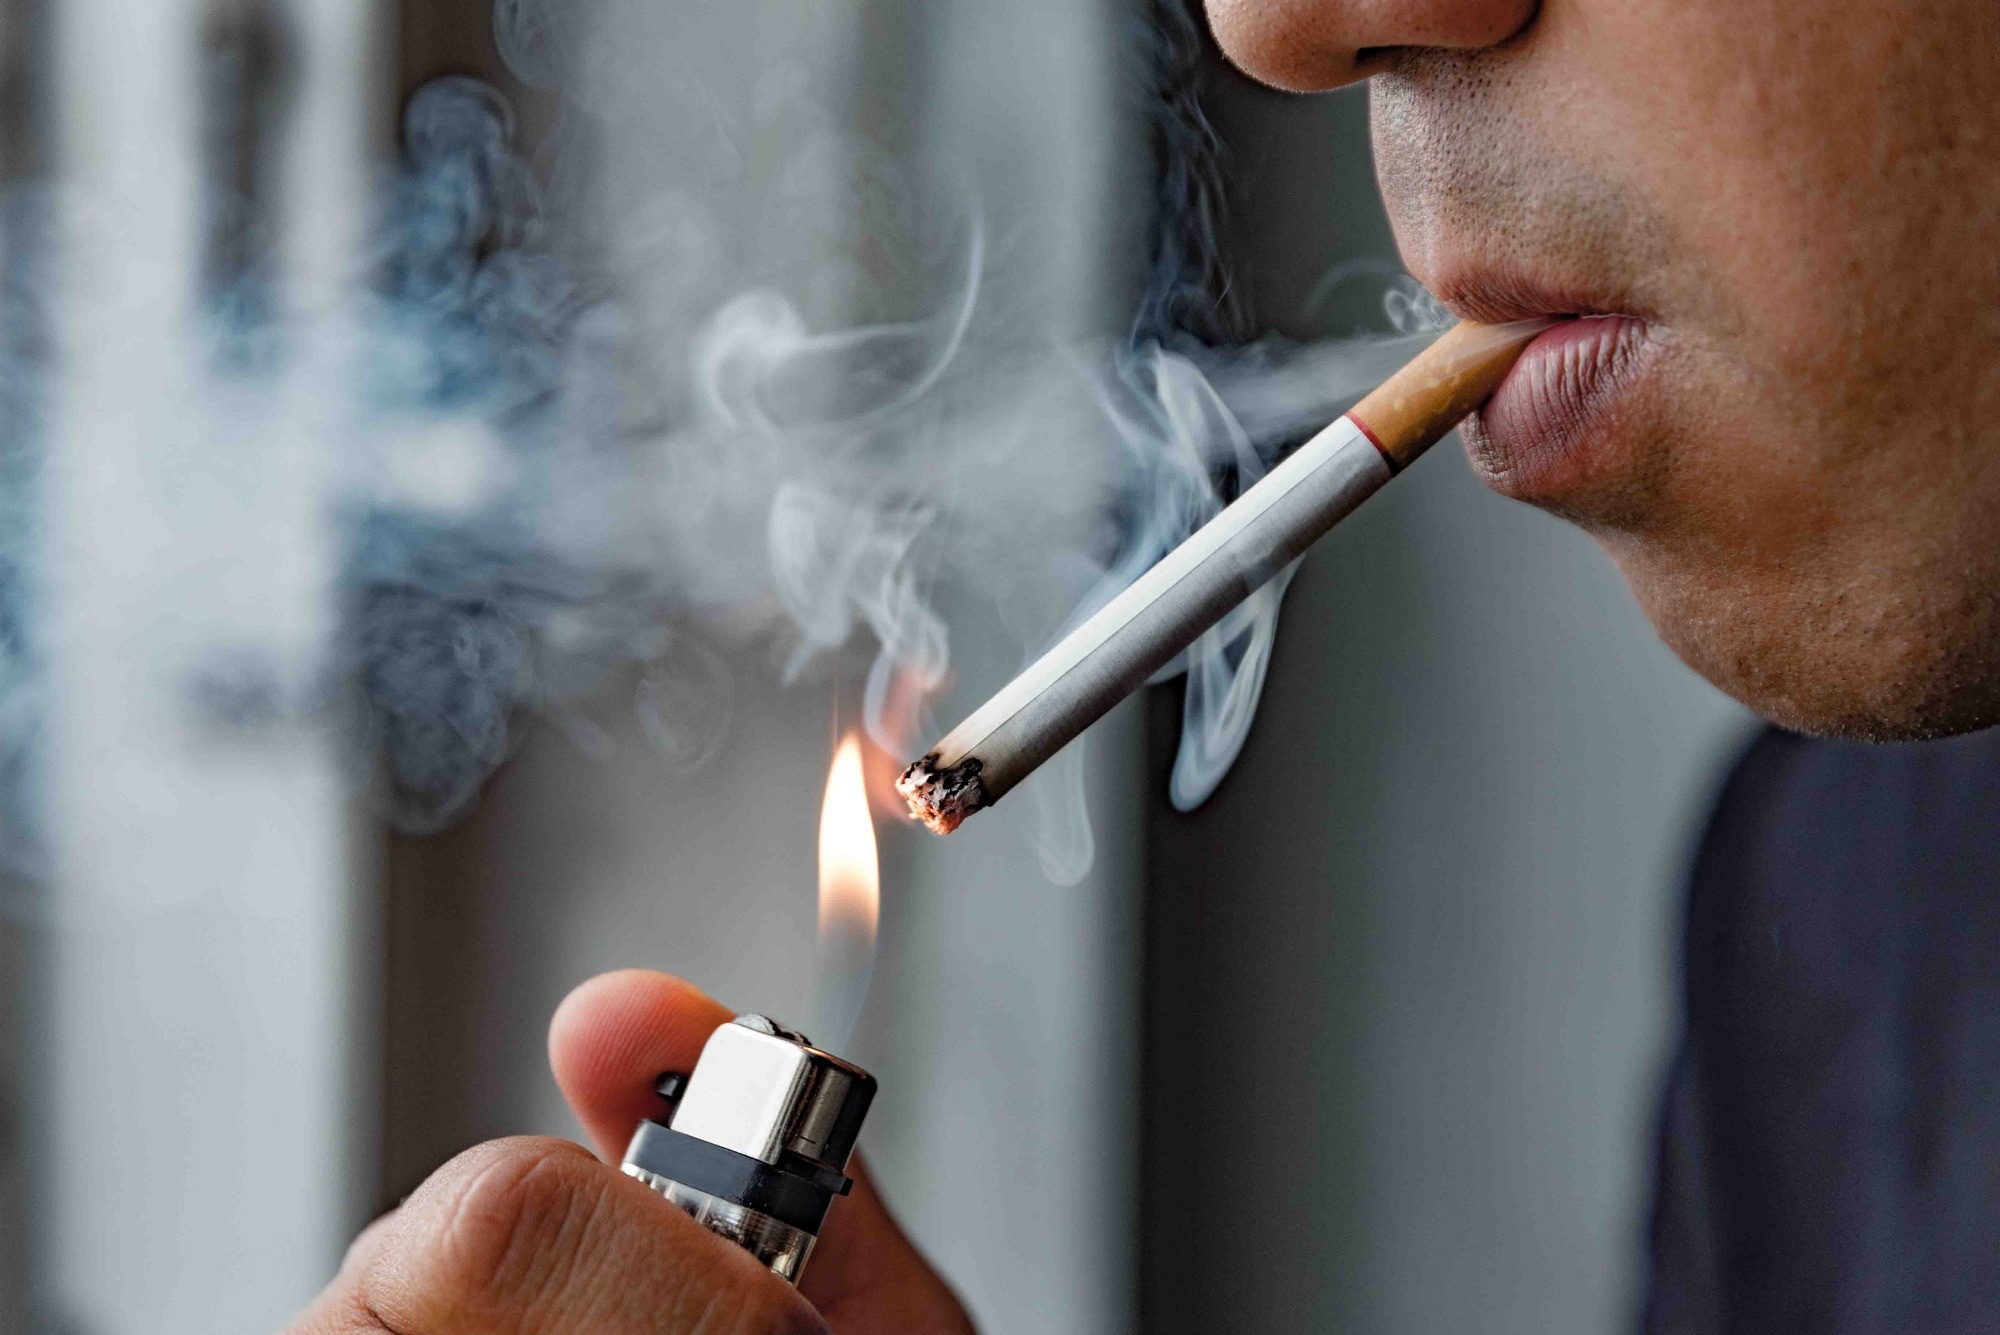 Study: Smoking induces increased apoptosis in osteoblasts: changes in bone matrix organic components. Image Credit: Nopphon_1987/Shutterstock.com